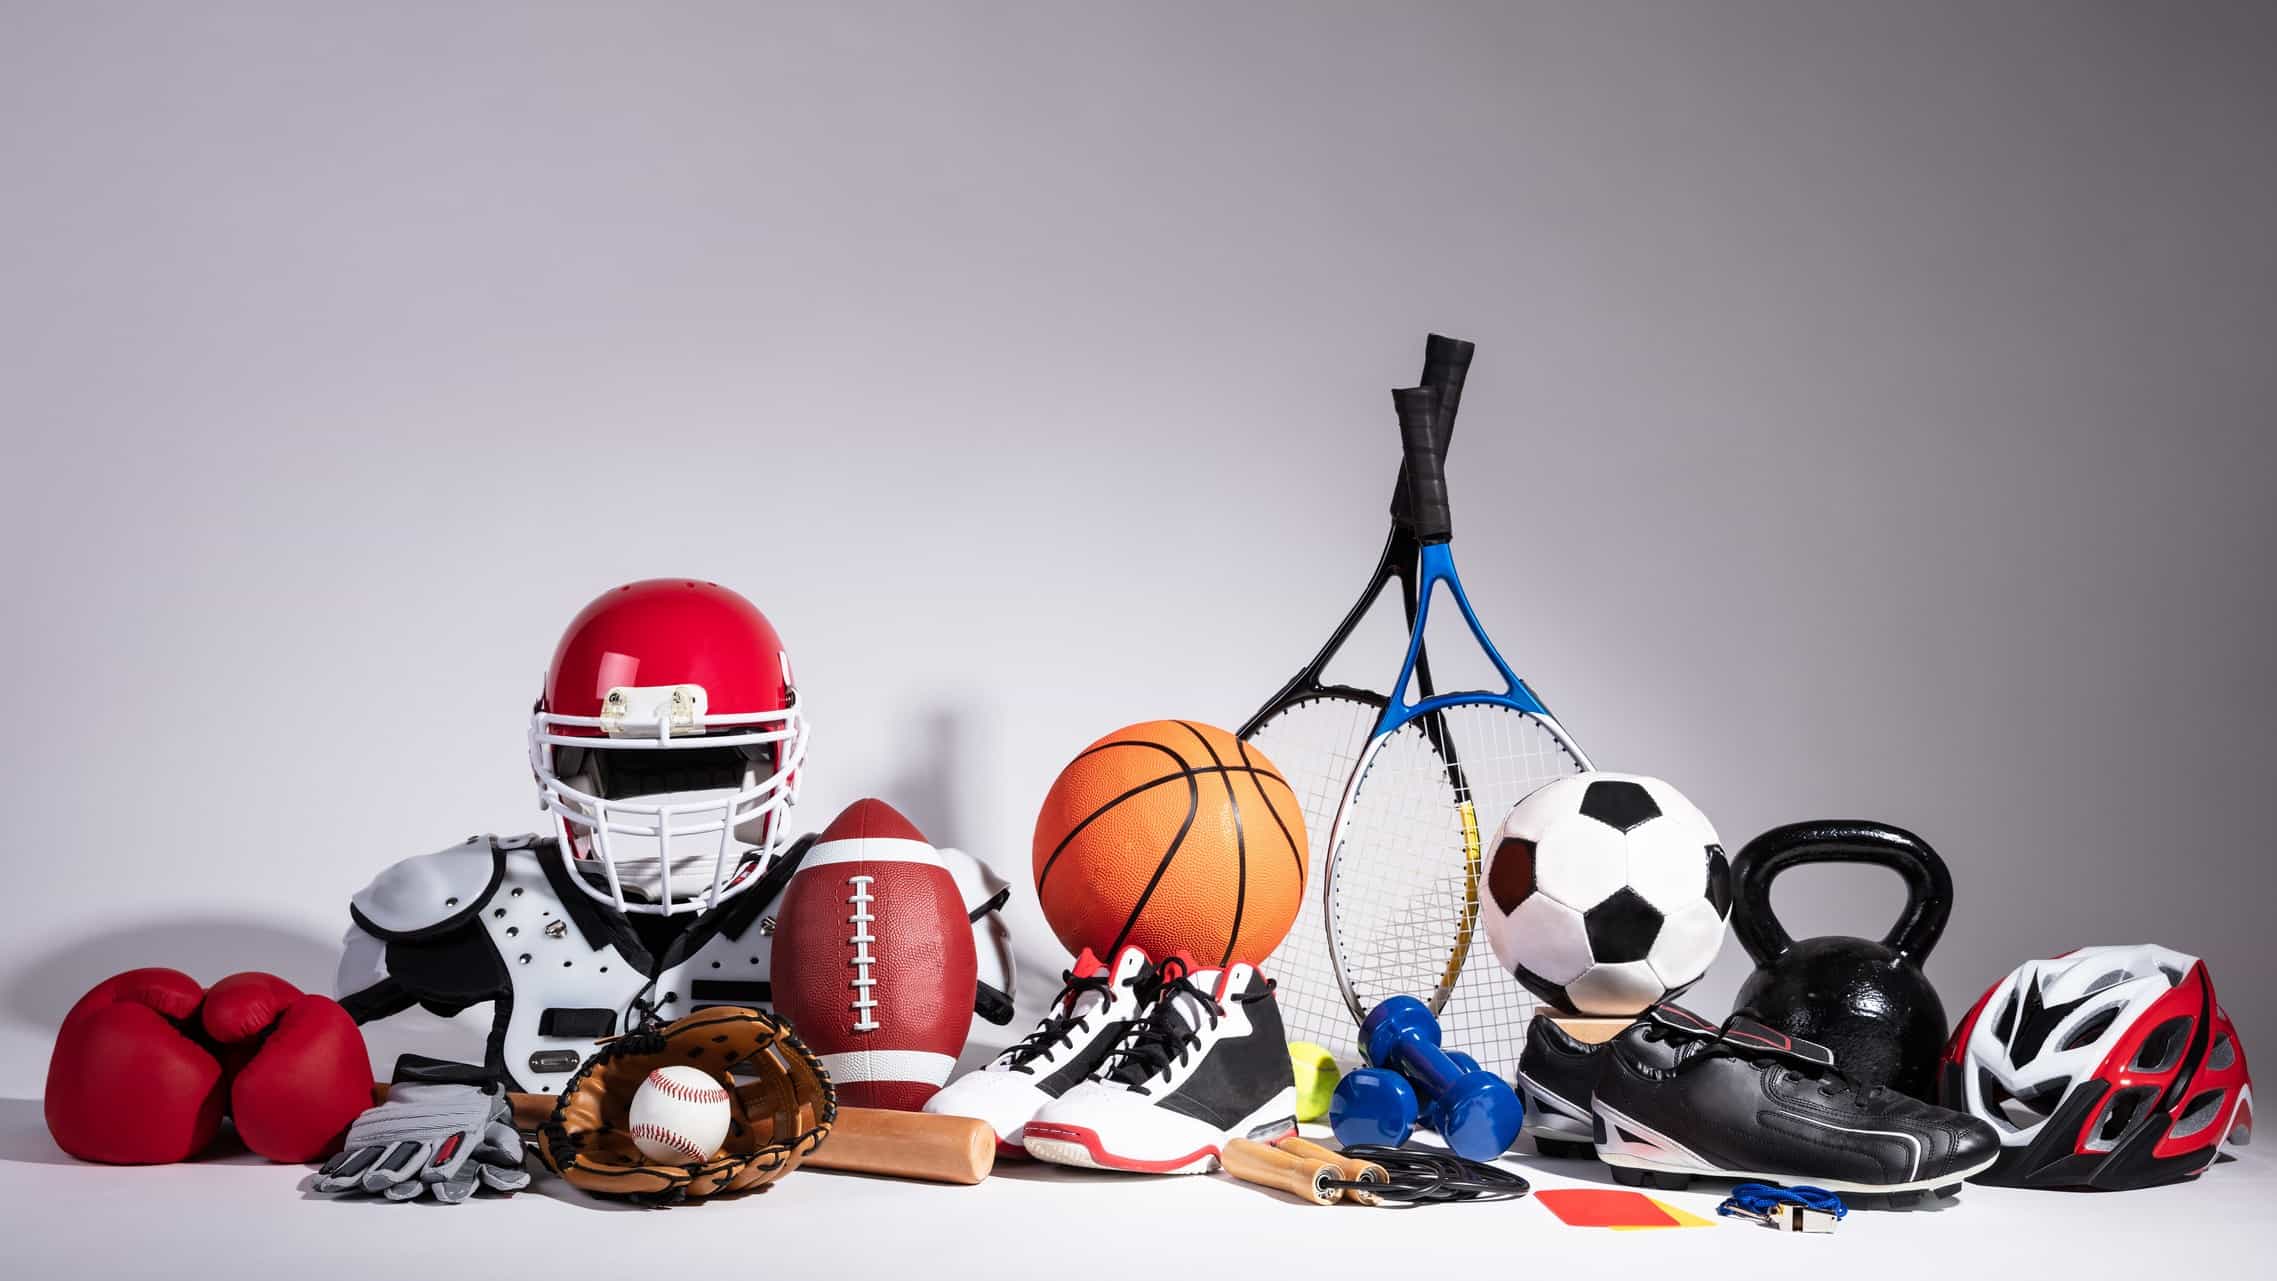 Pile of sporting equipment against a white background